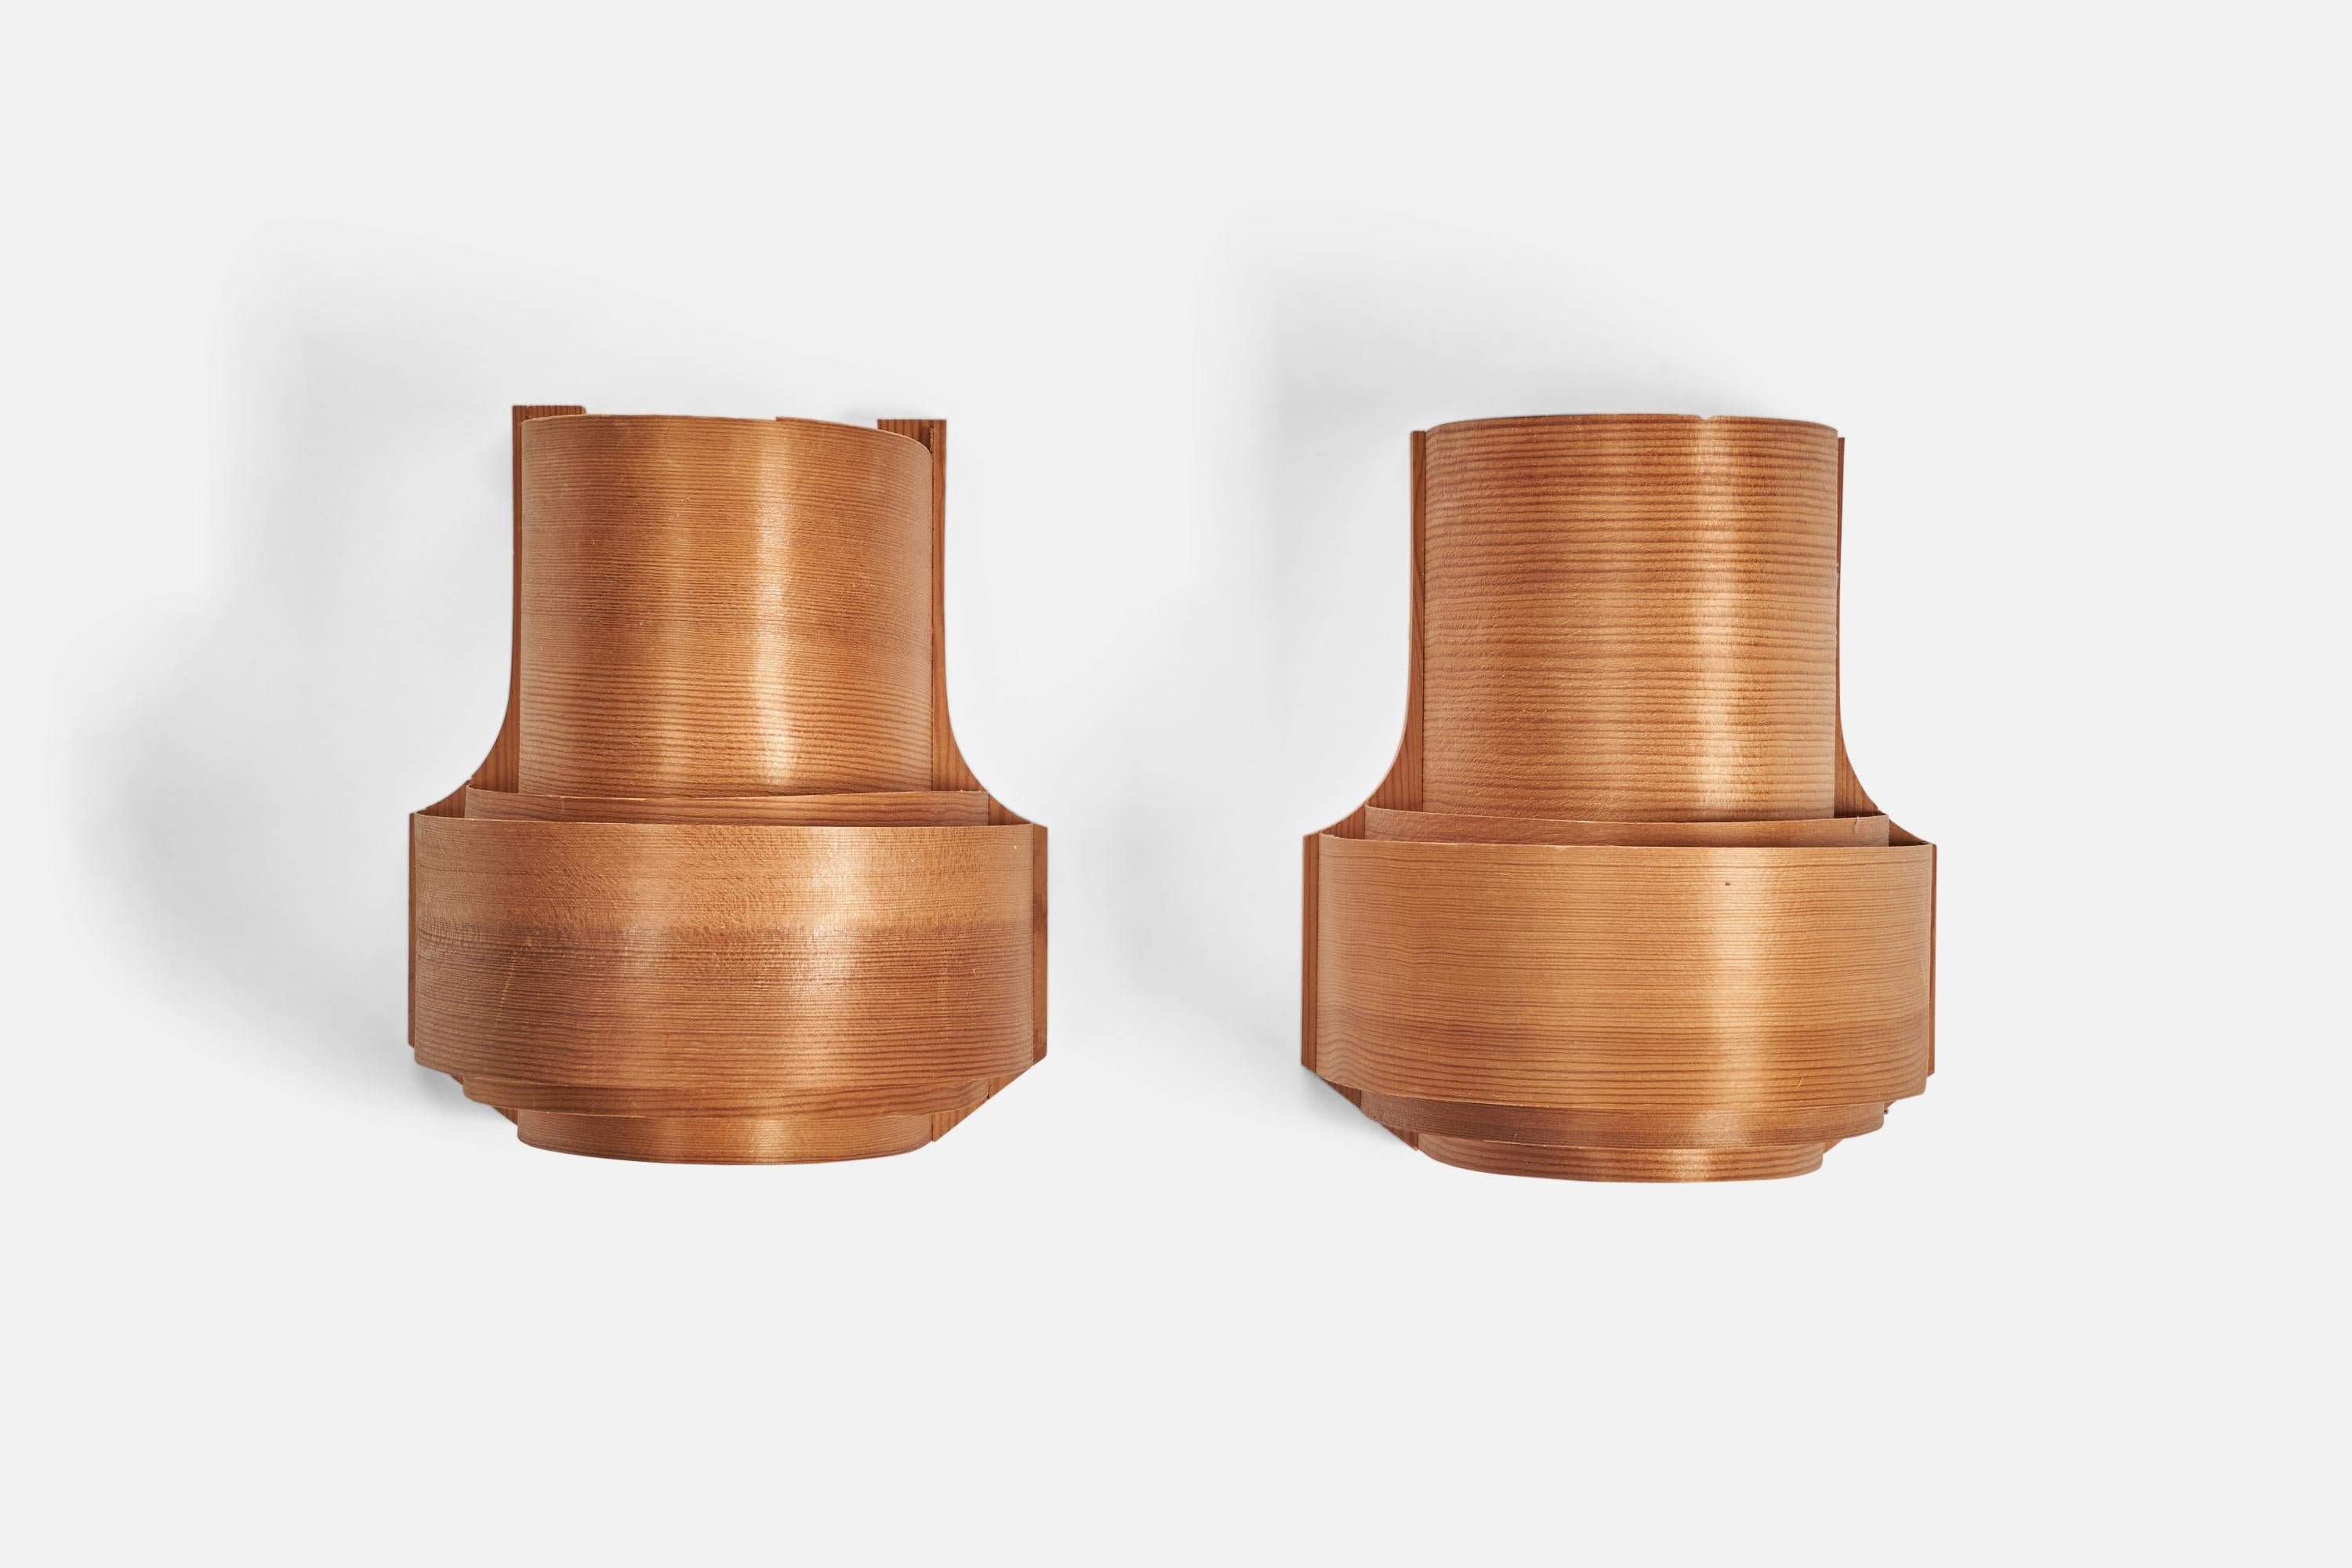 Danish Designer, Wall Lights, Moulded Pine Veneer, Denmark, 1970s In Good Condition For Sale In High Point, NC